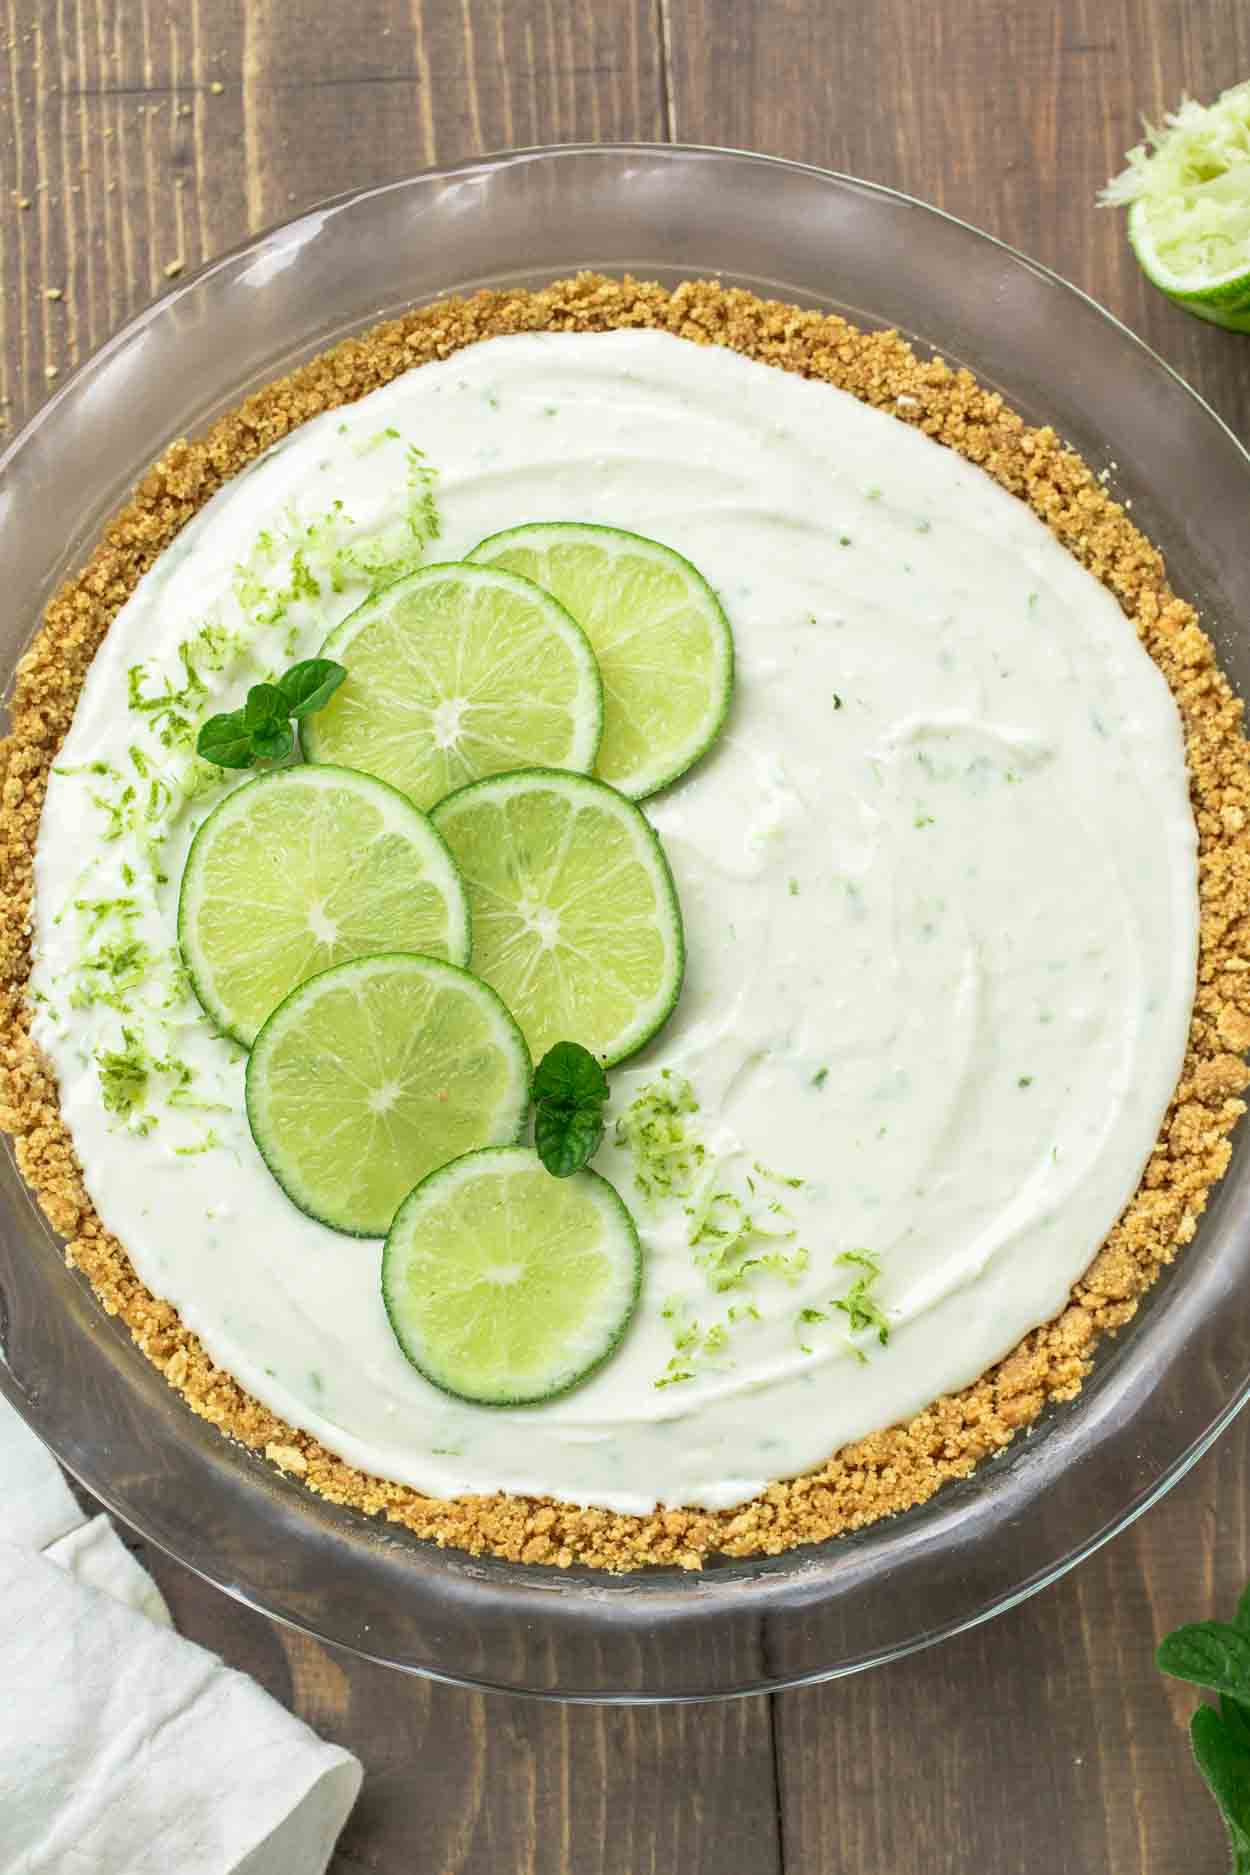 A pie version of this layered key lime dessert.